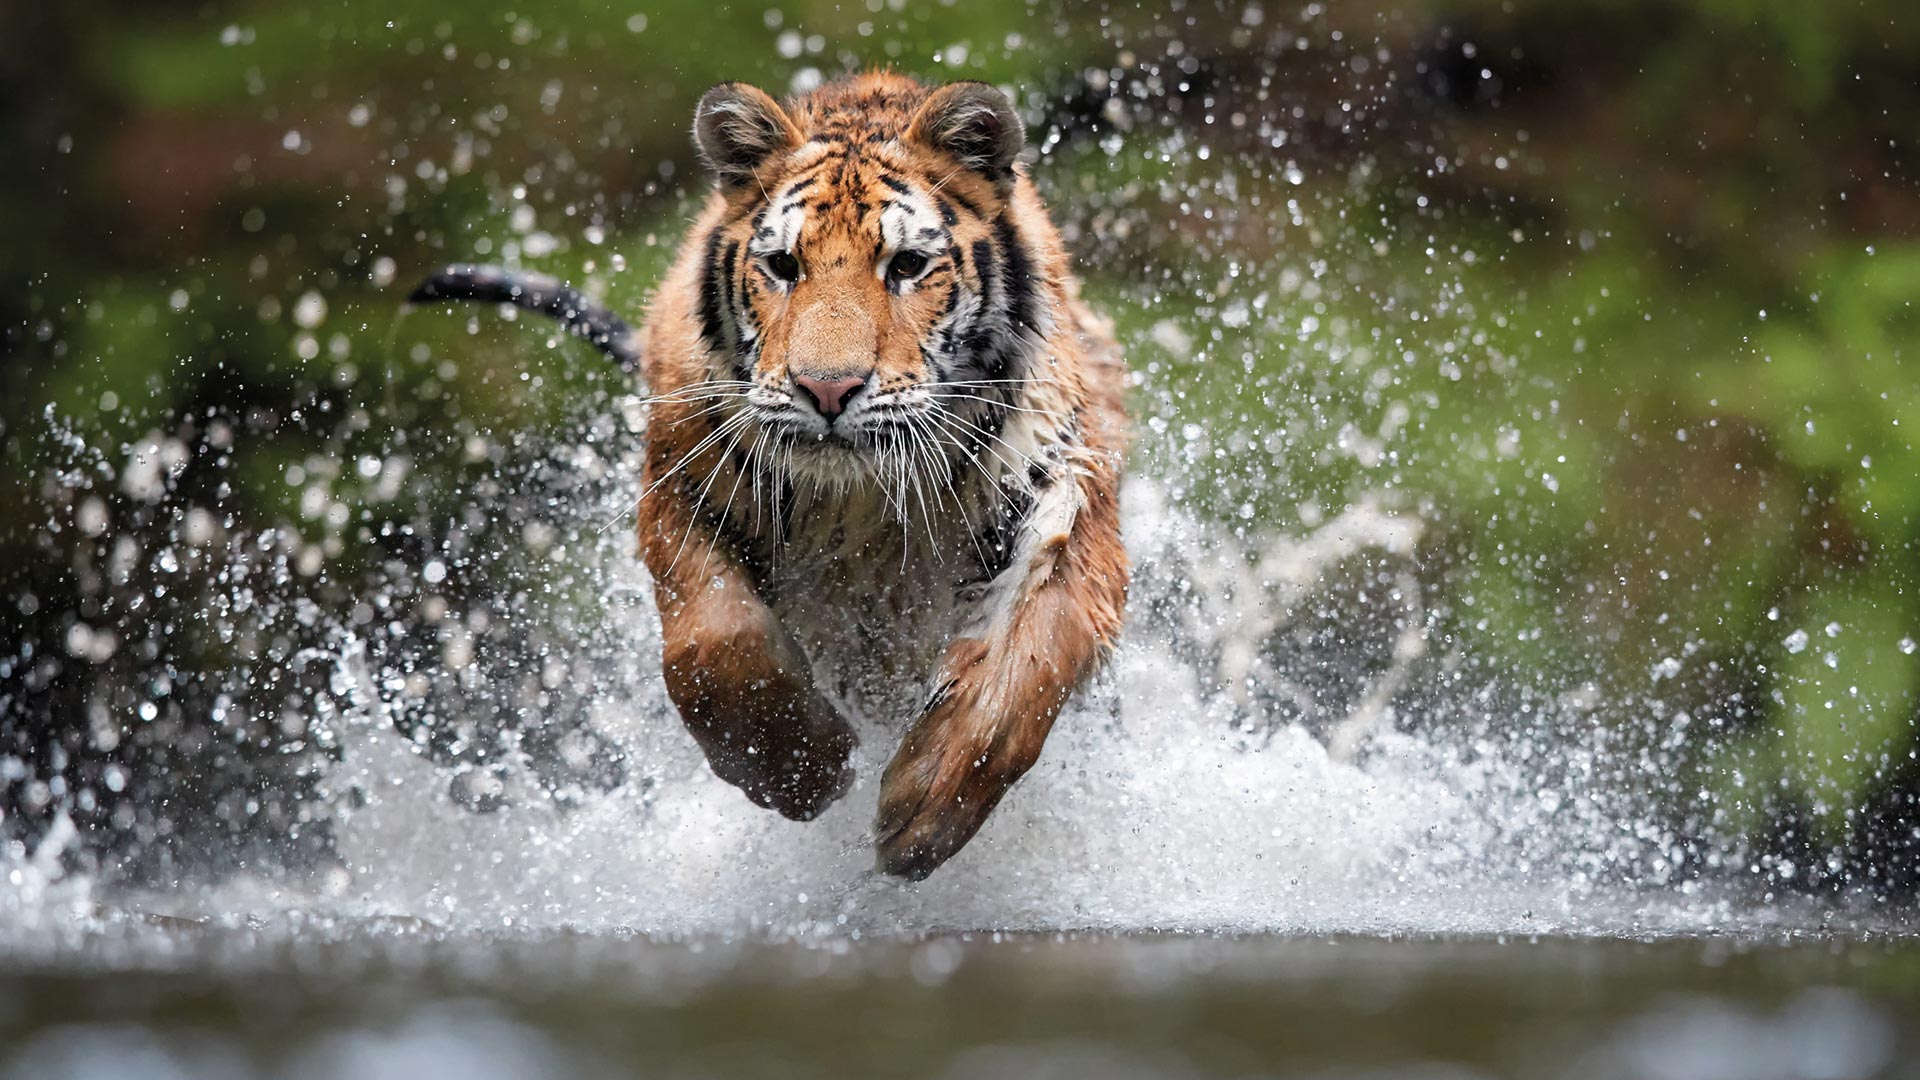 Siberian tiger running and jumping in water